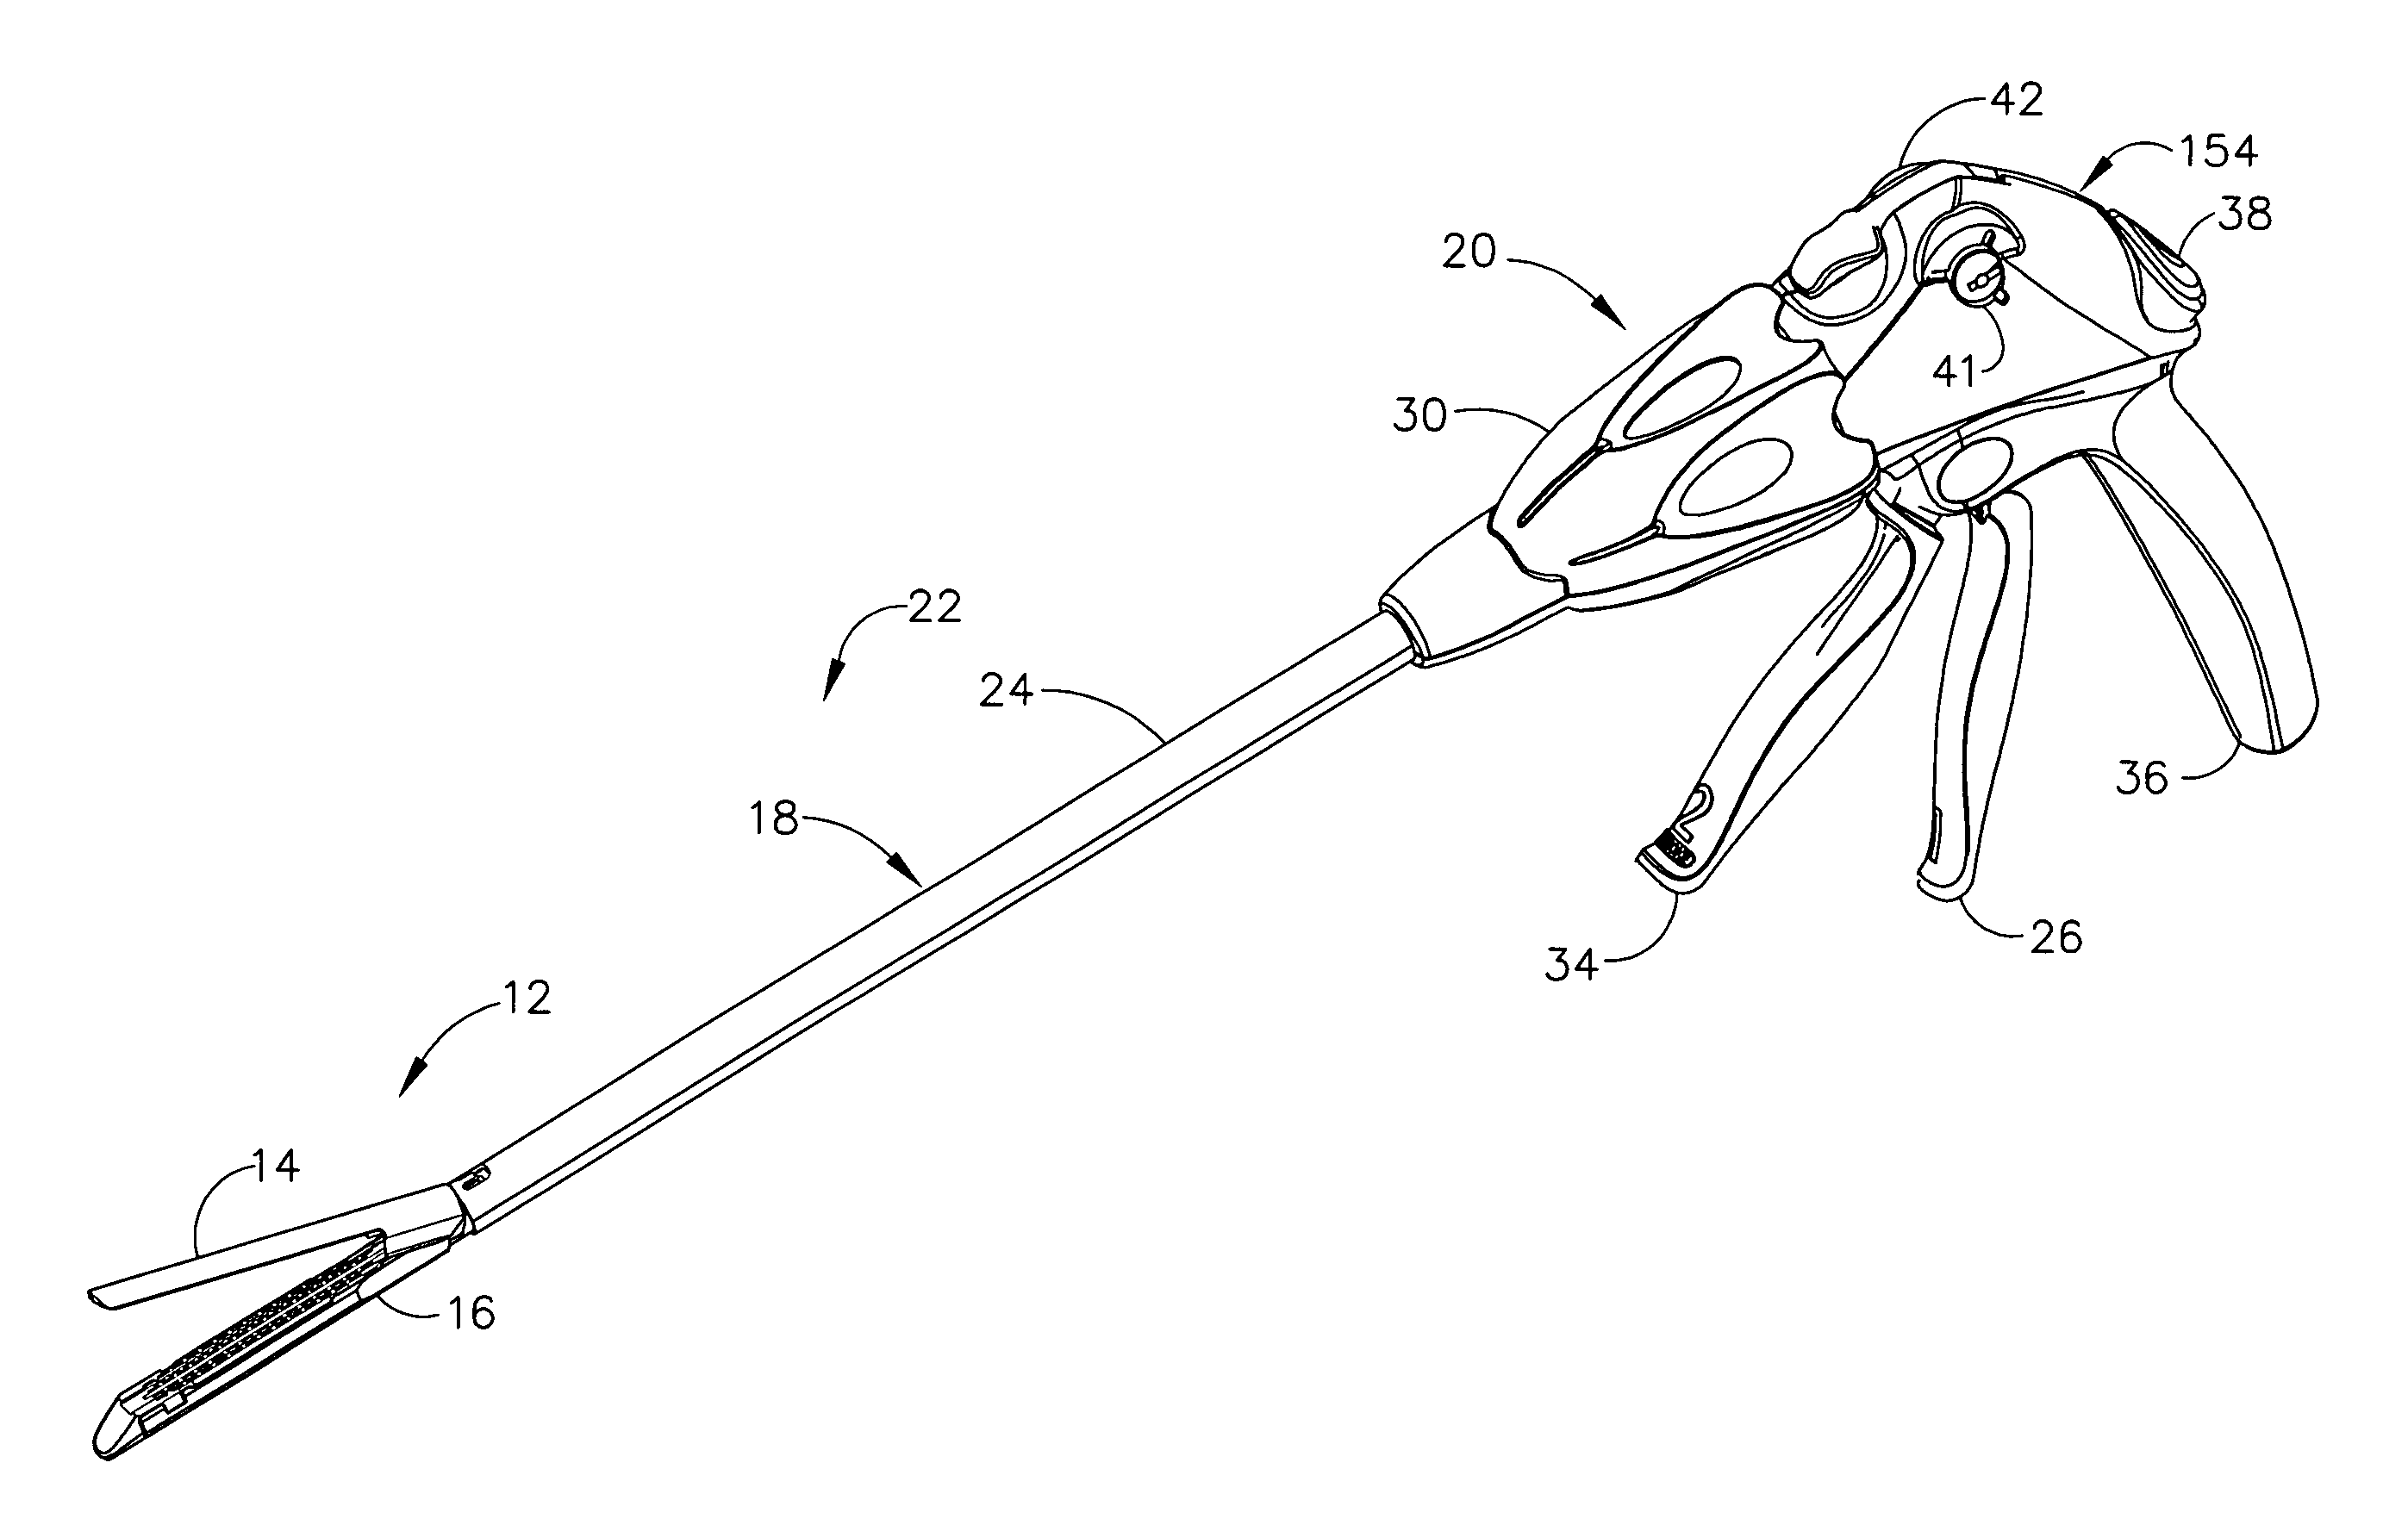 Surgical instrument incorporating EAP complete firing system lockout mechanism